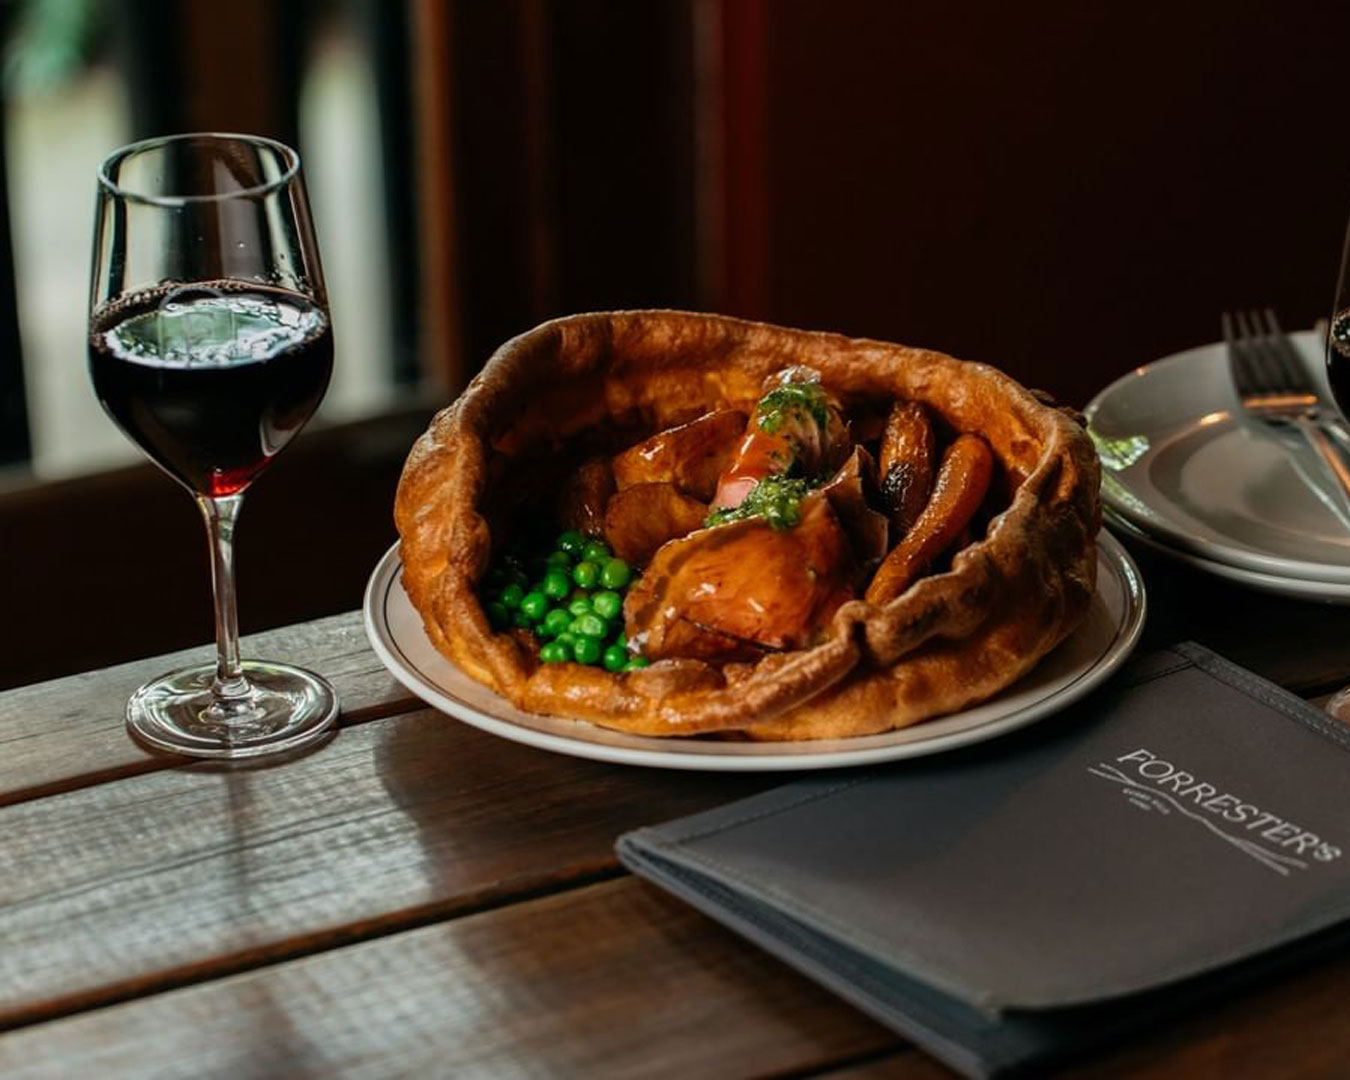 roast meal inside a giant Yorkshire pudding